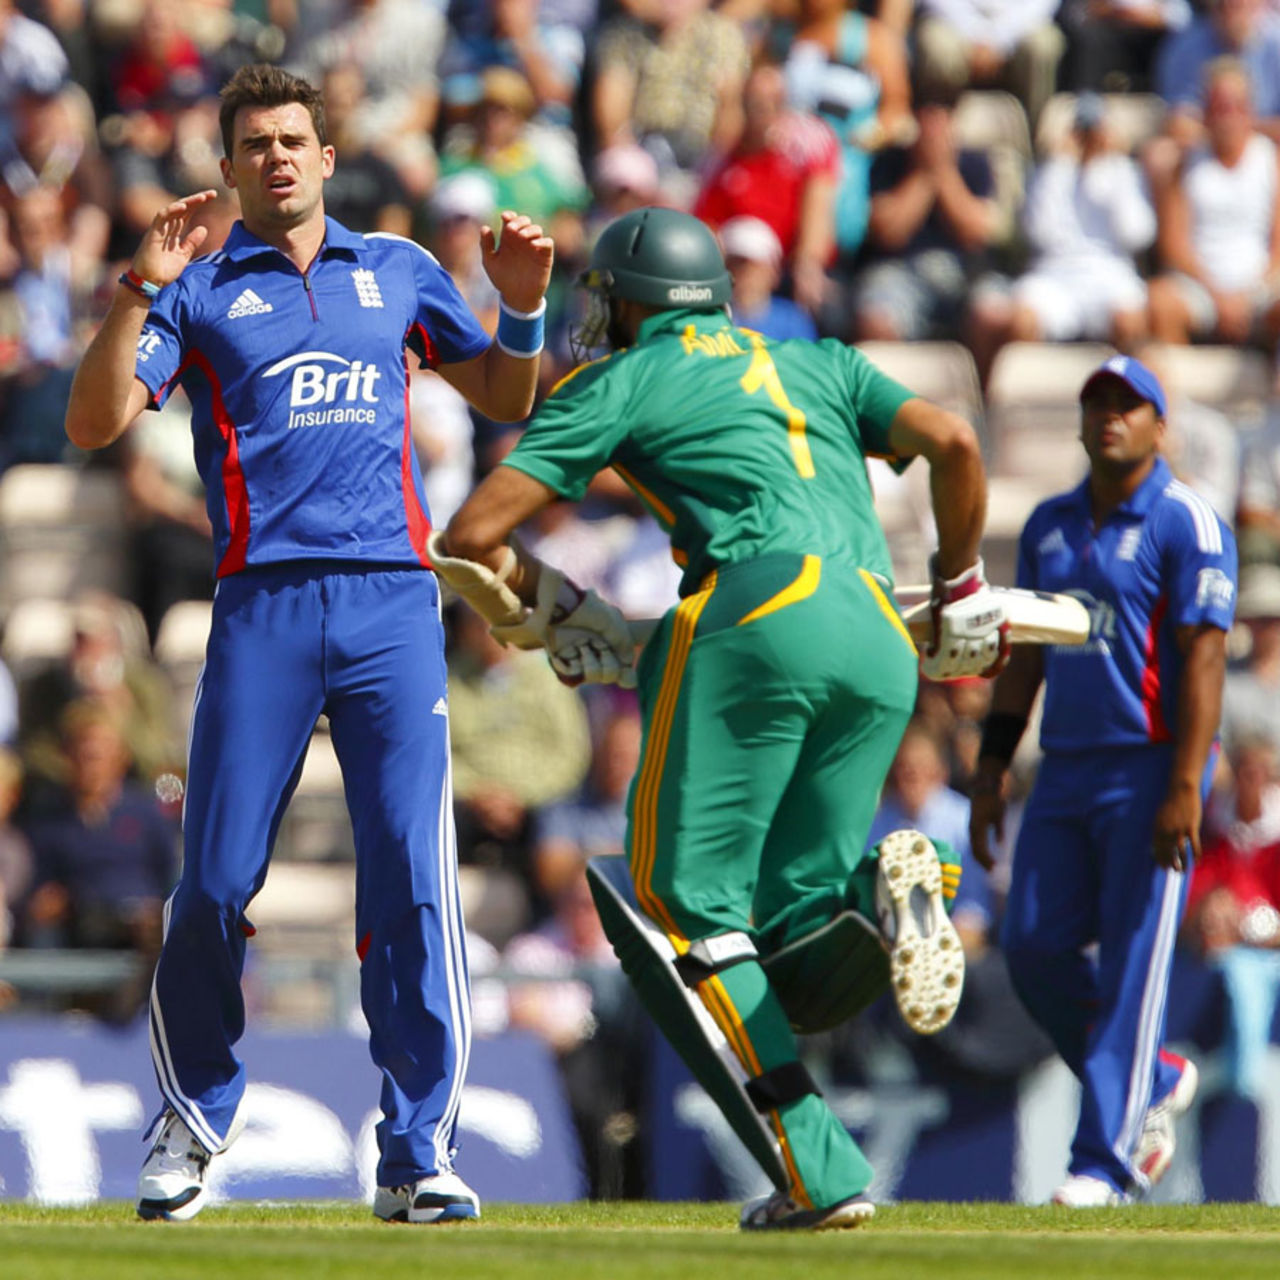 James Anderson suffered several near misses early on, England v South Africa, 2nd NatWest ODI, West End, August 28, 2012